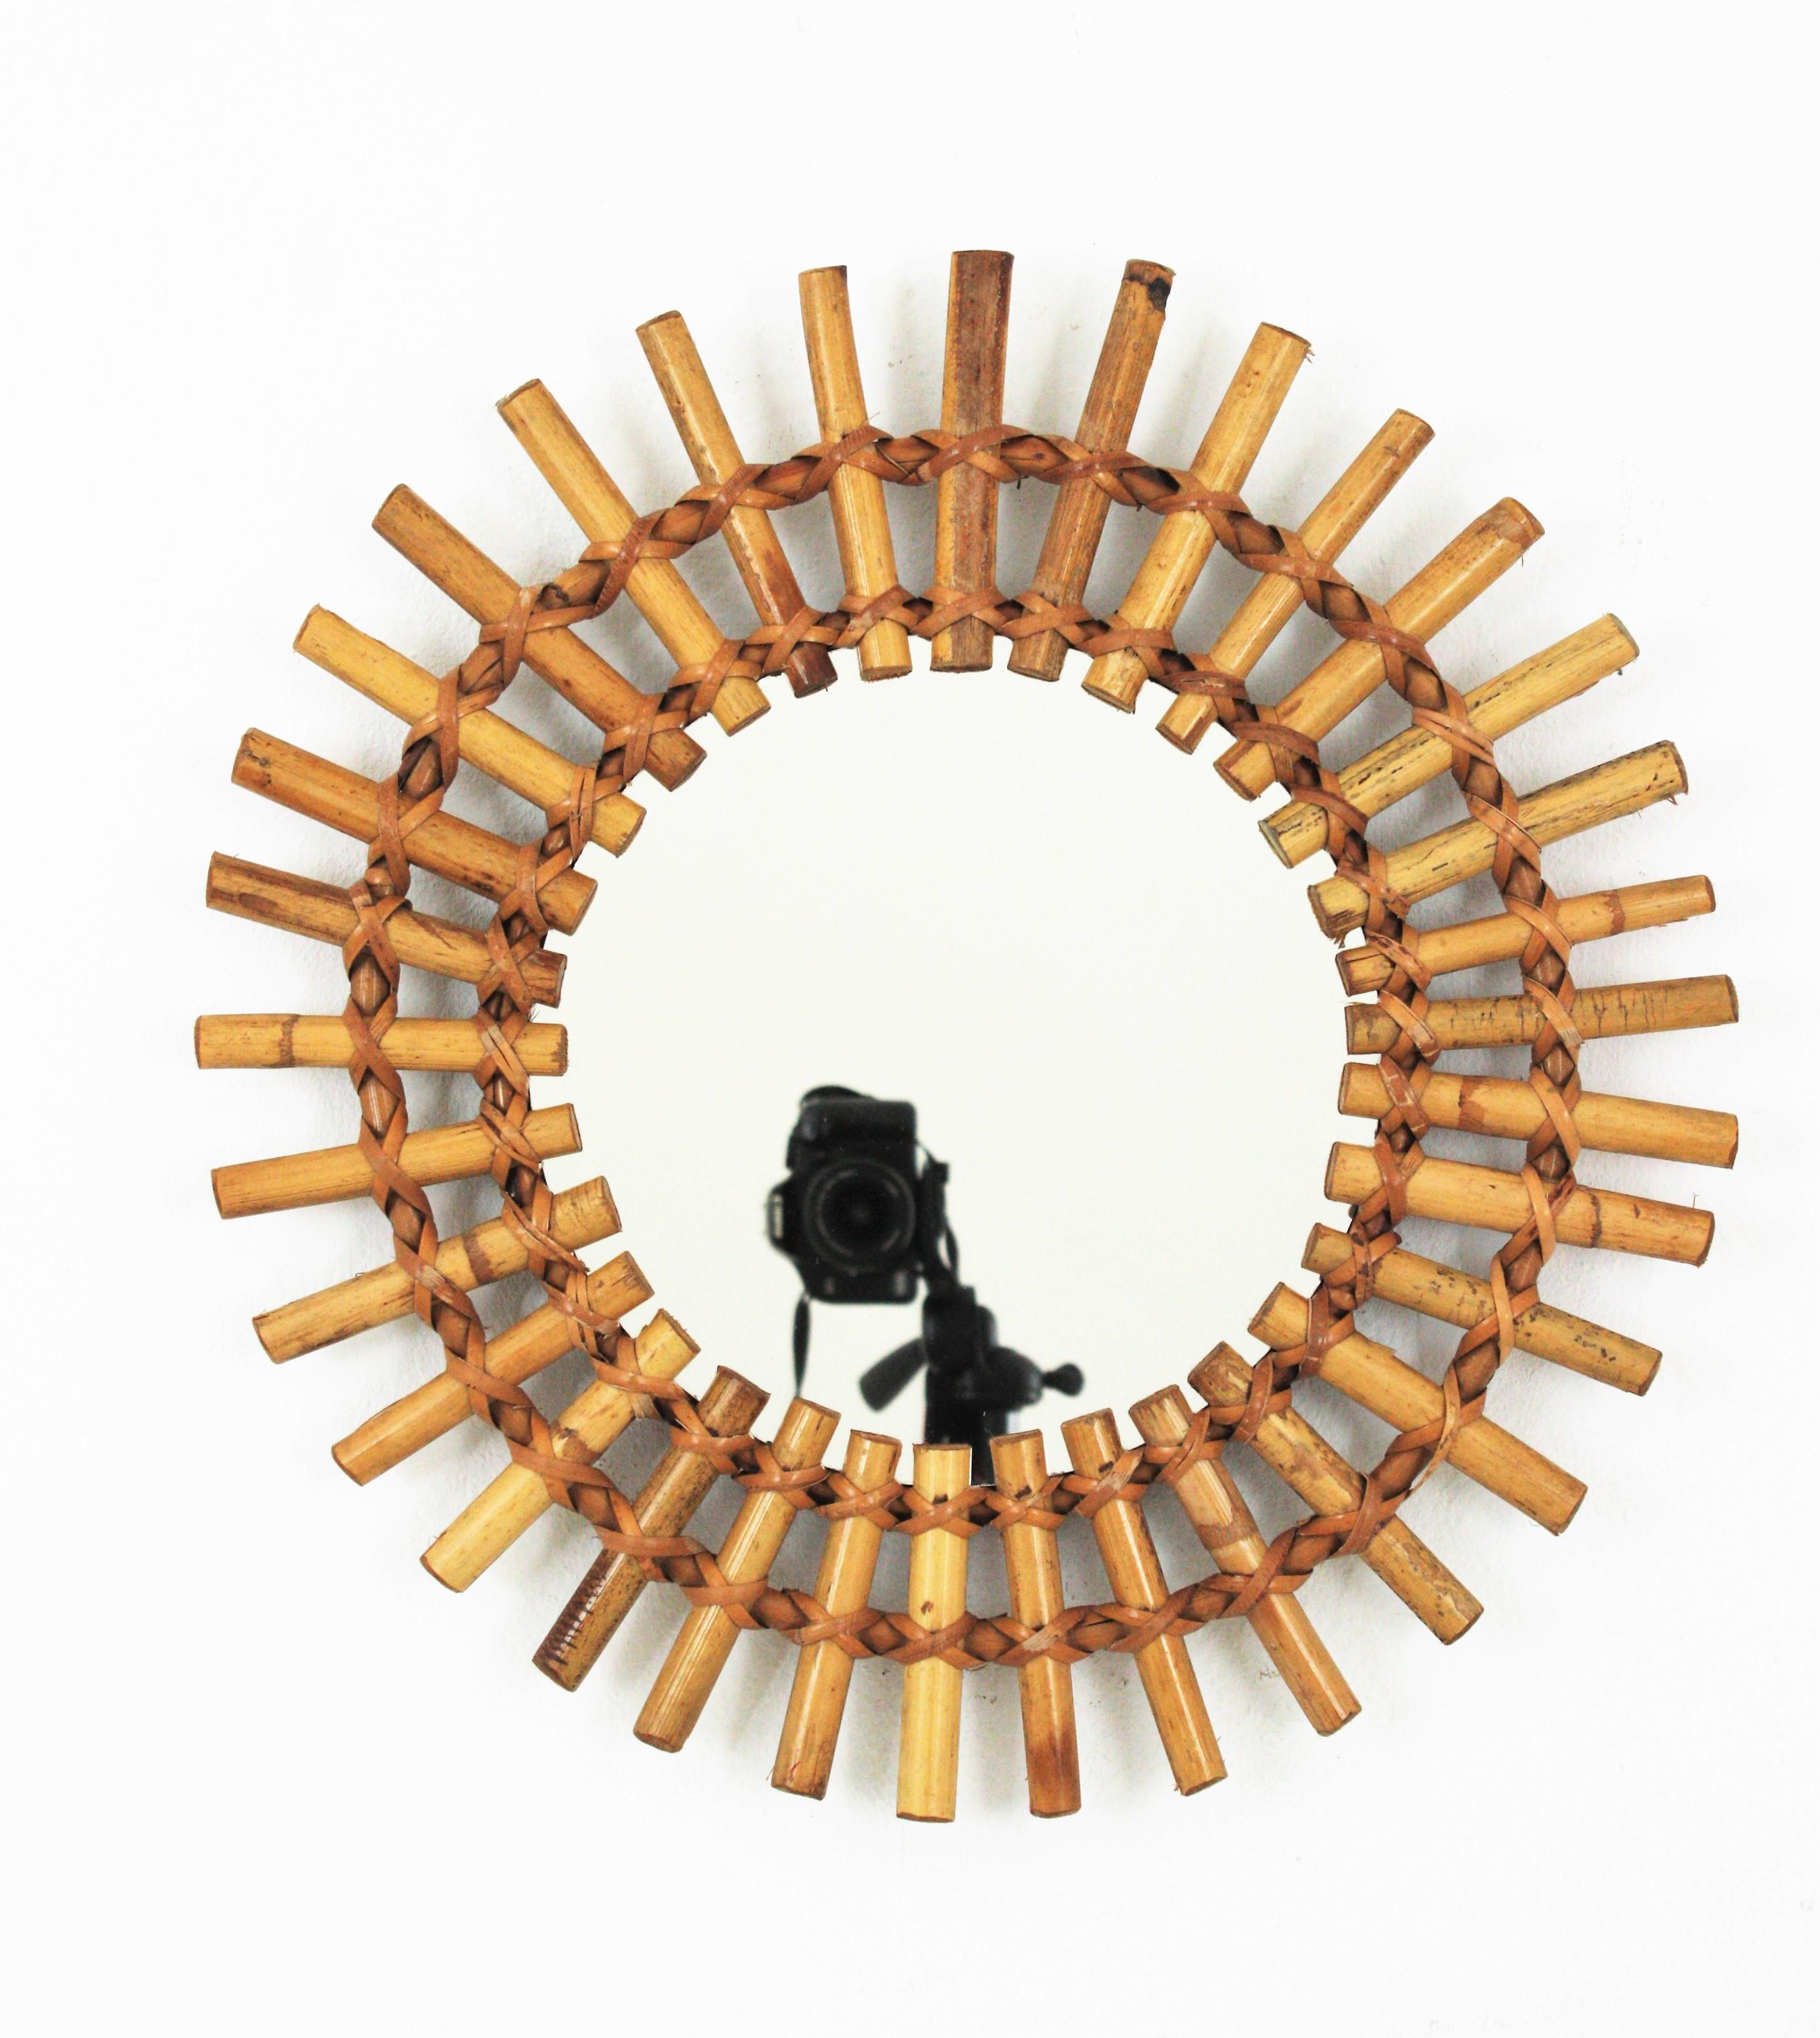 A beautiful sunburst mirror handcrafted in rattan, and split bamboo. France, 1950s
Its design combines Midcentury and Tiki style accents.
This wall mirror will be a nice addition to a large sunburst mirror wall composition. 
Also lovely placed